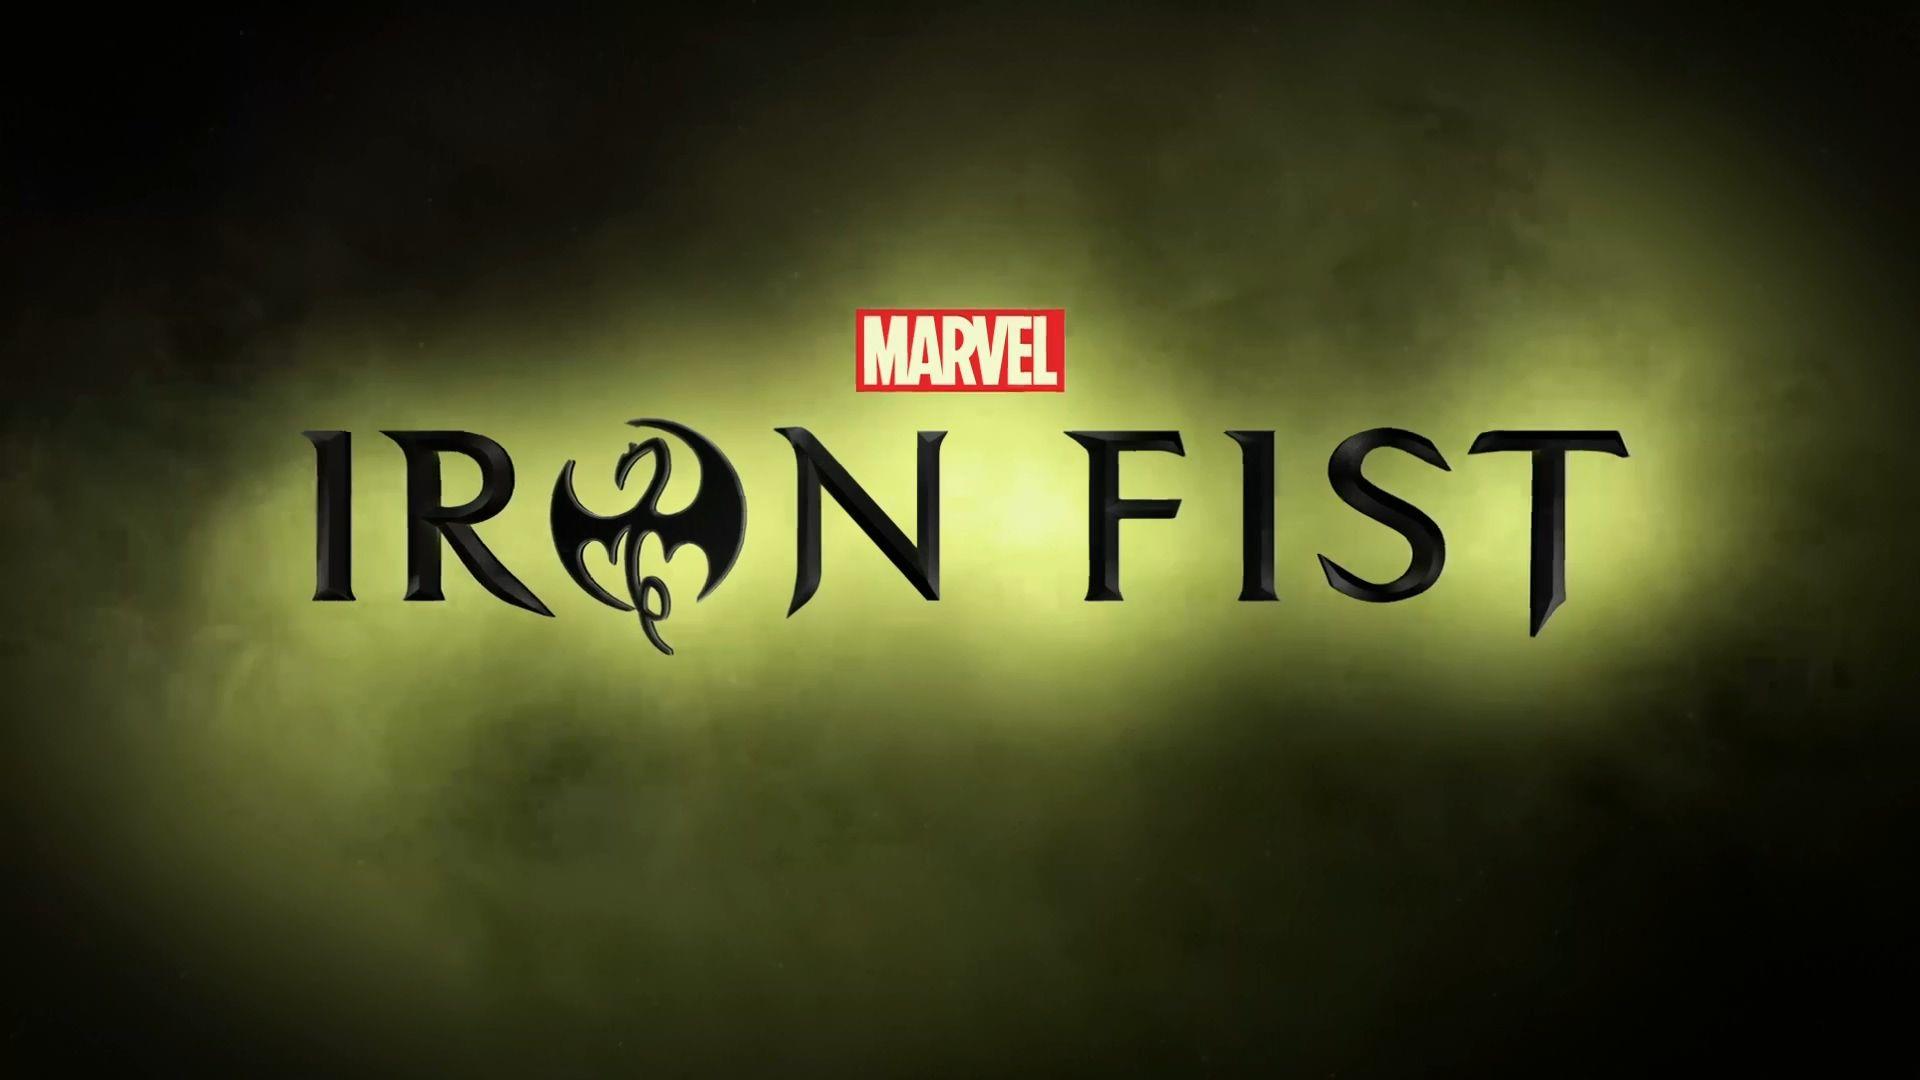 Marvel's Iron Fist is Here!